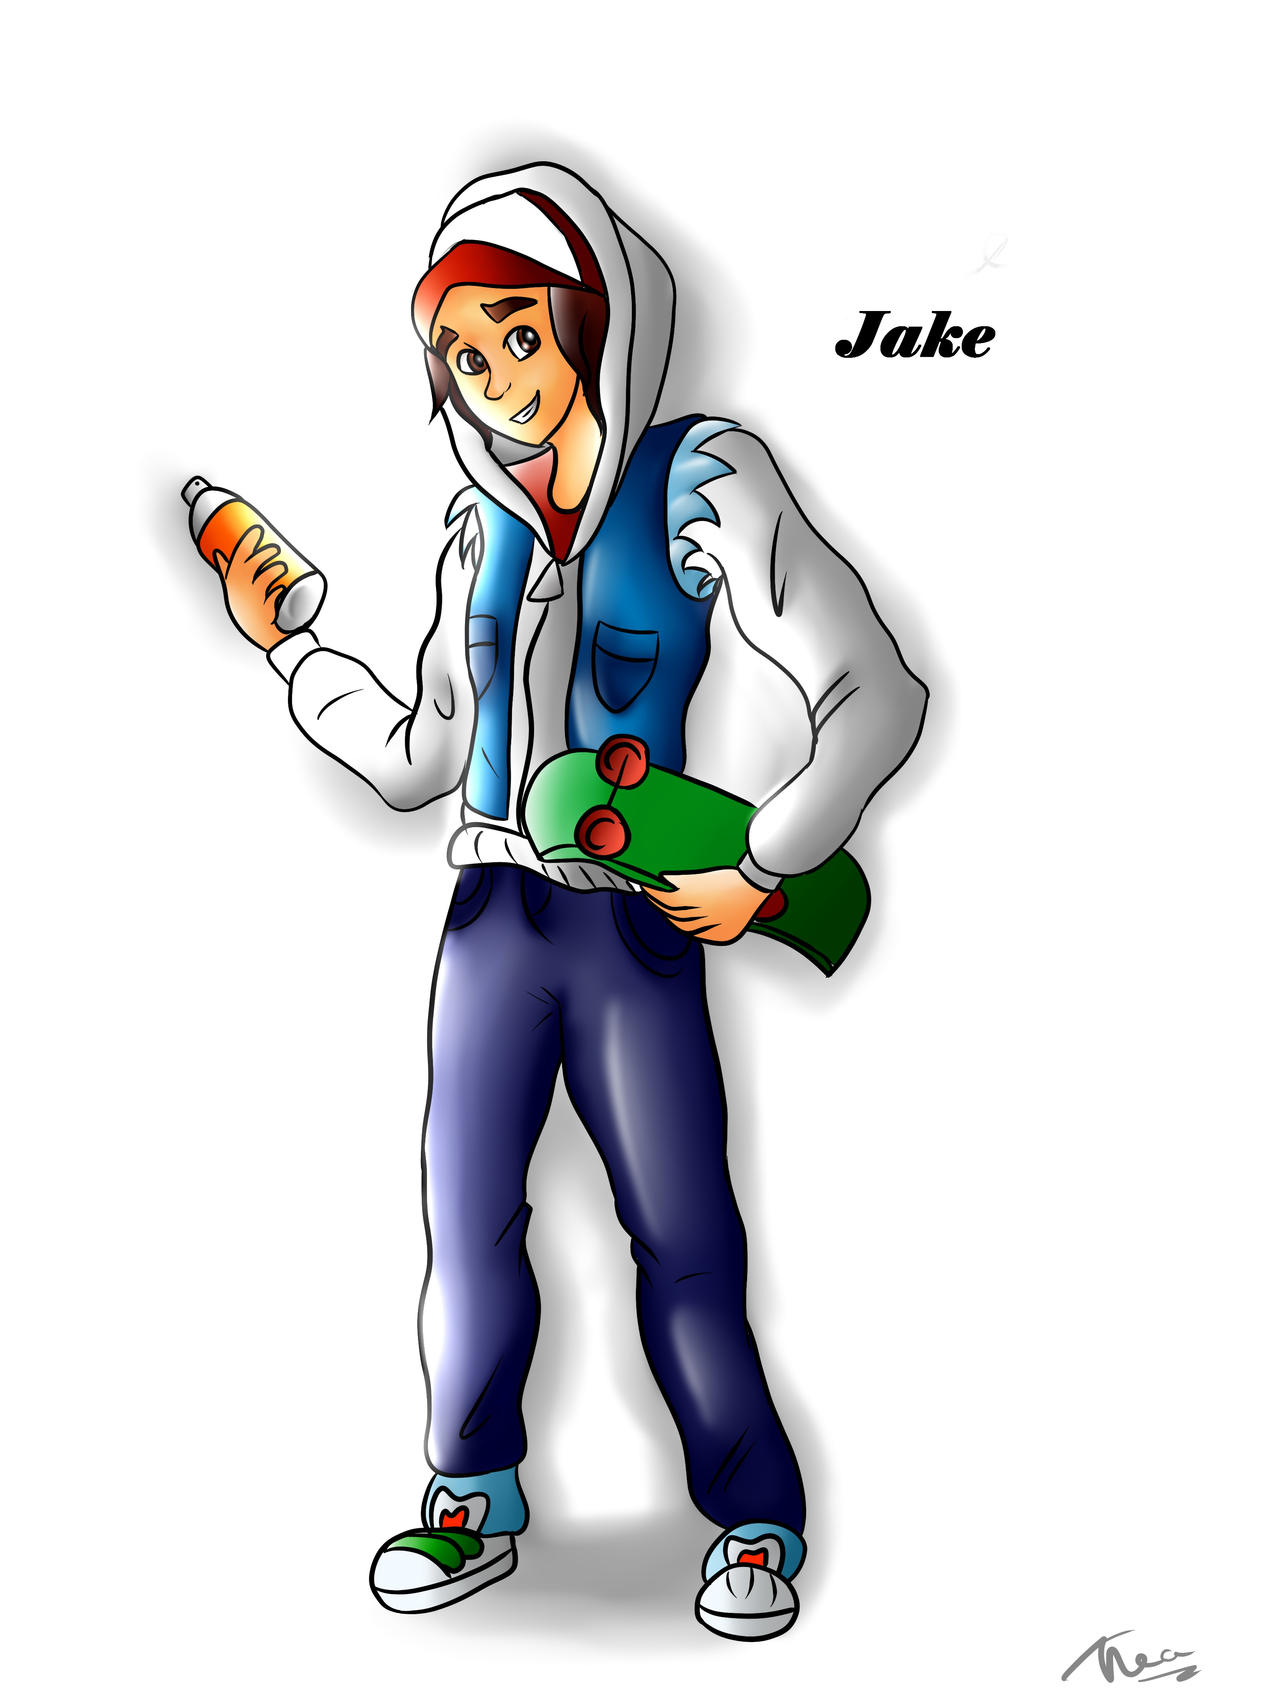 Subway Surfers: The Animated Series - Jake by CartoonLover20 on DeviantArt